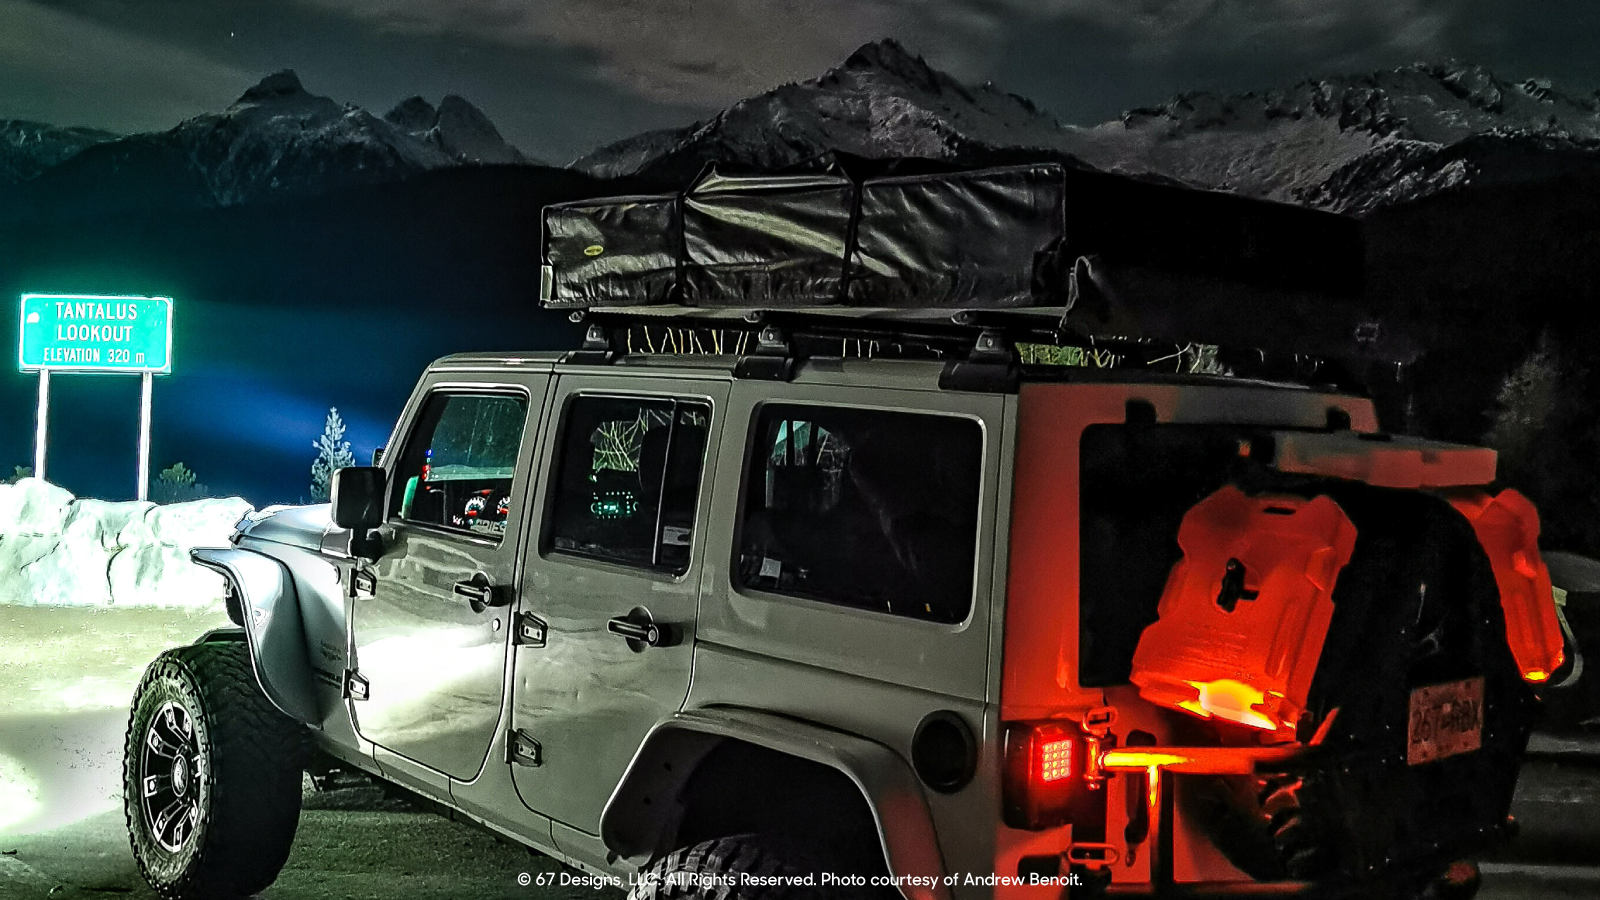 Jeep overlooking some mountains at night